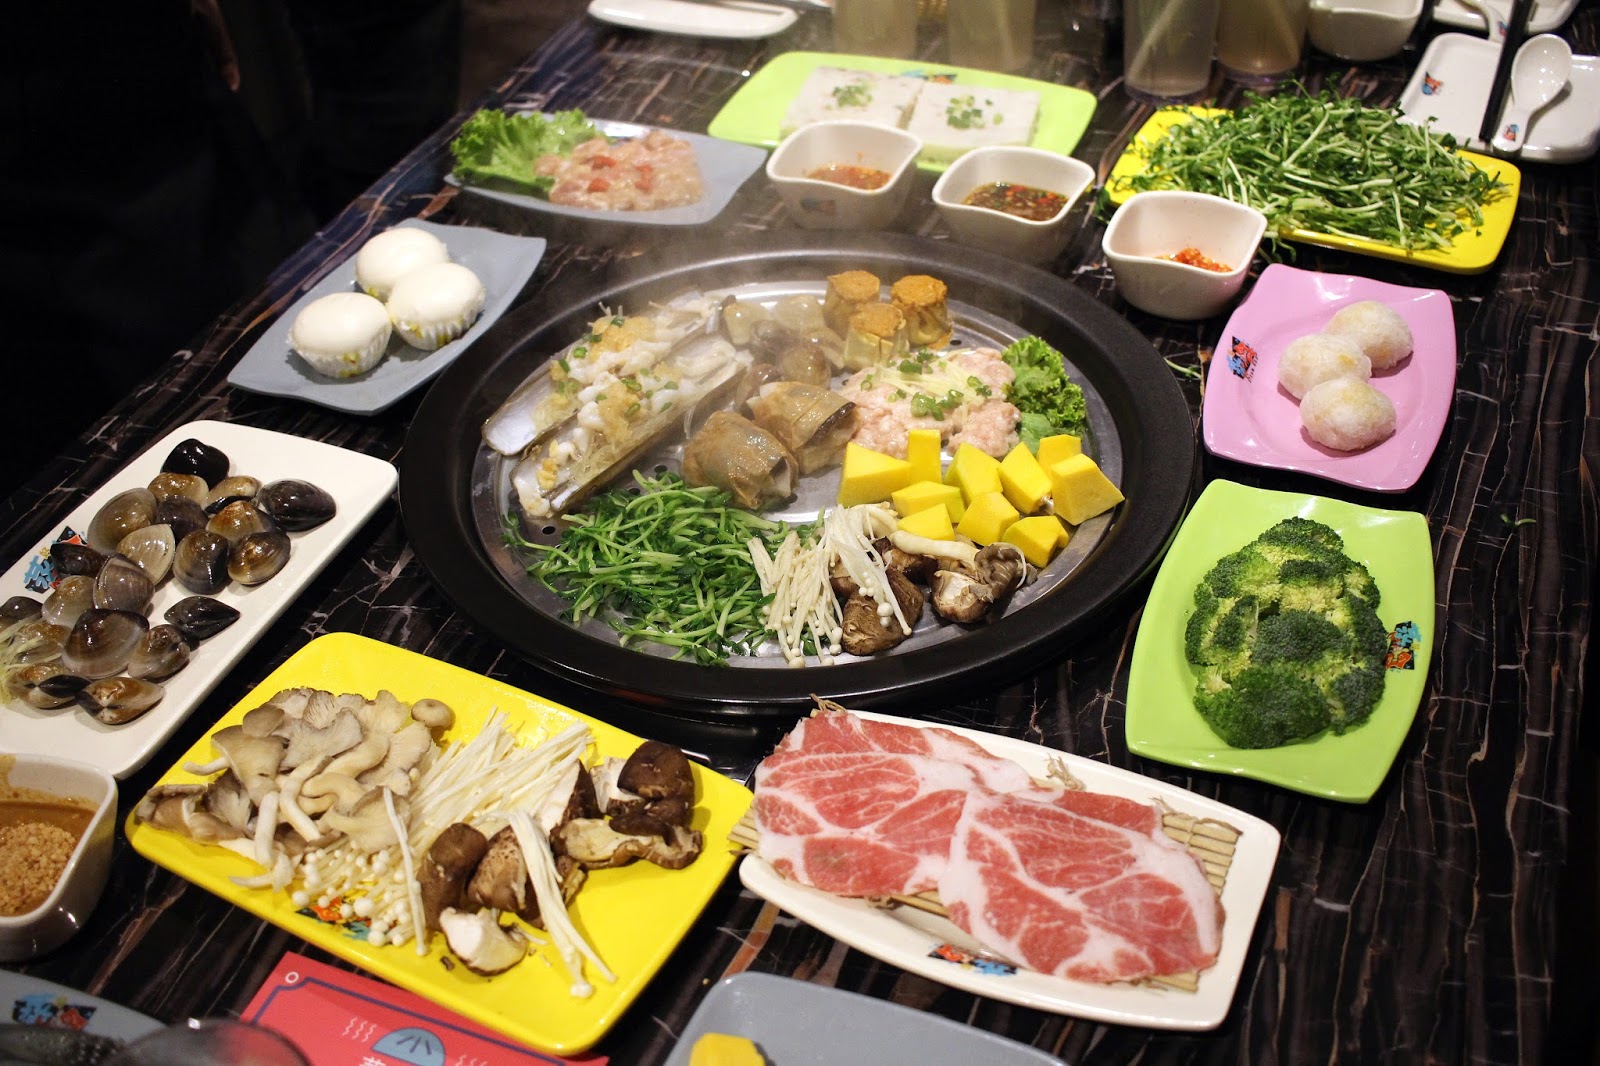 The steaming process retains the original flavors and nutrients of the food, making it a healthier option compared to the traditional hotpot